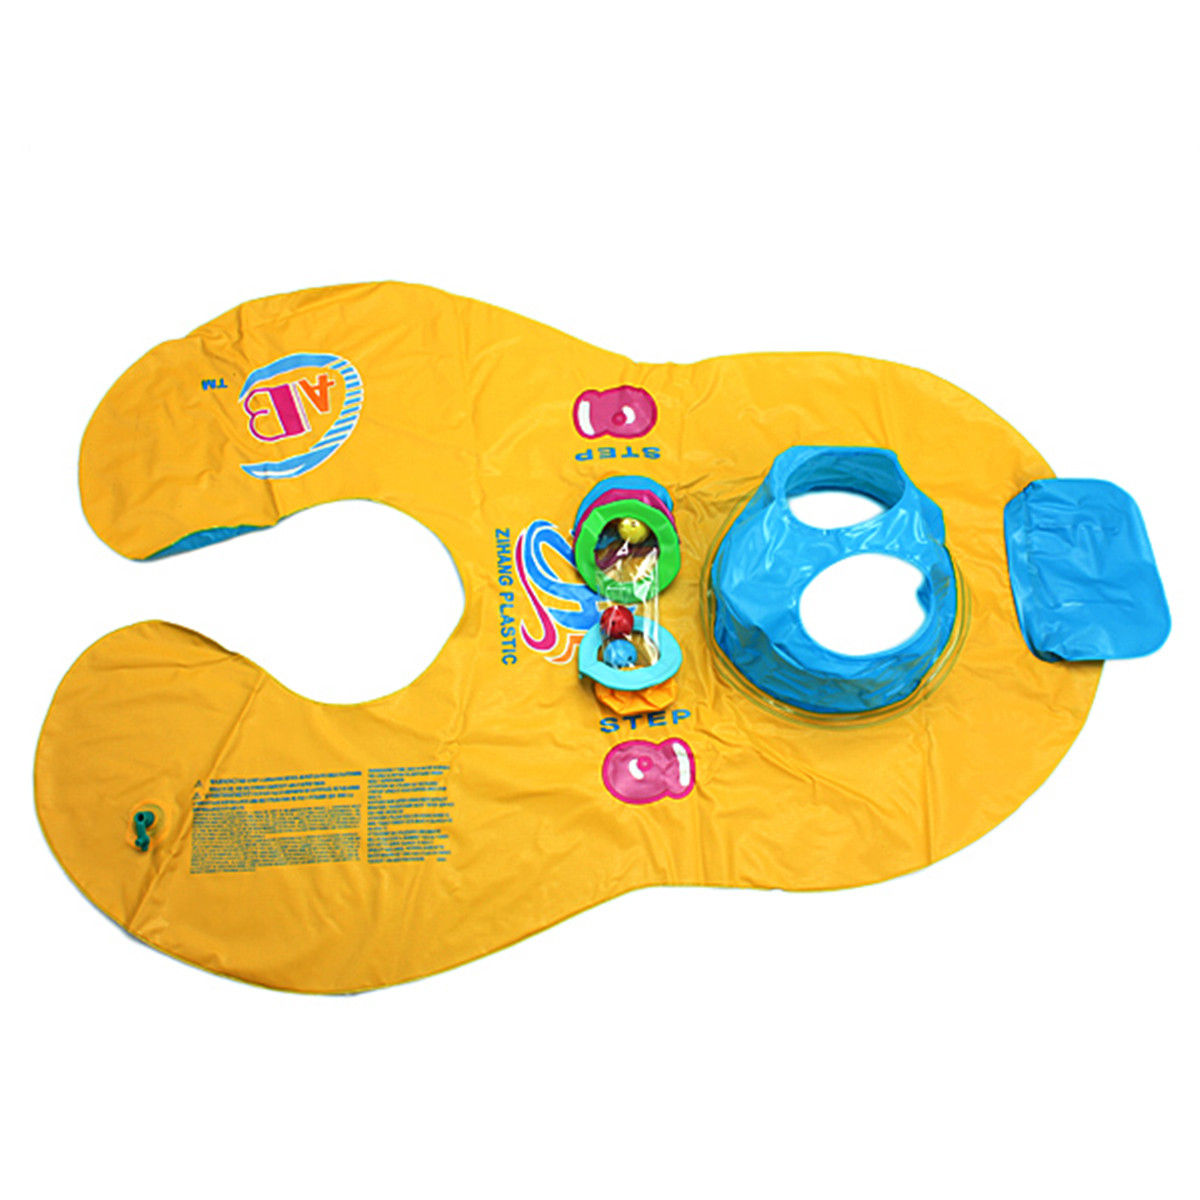 ABC-Safe-Inflatable-Mother-And-Baby-Swim-Float-Boat-Raft-Kids-Chair-Seat-Boat-Play-Pool-Bath-Swimmin-48774-7